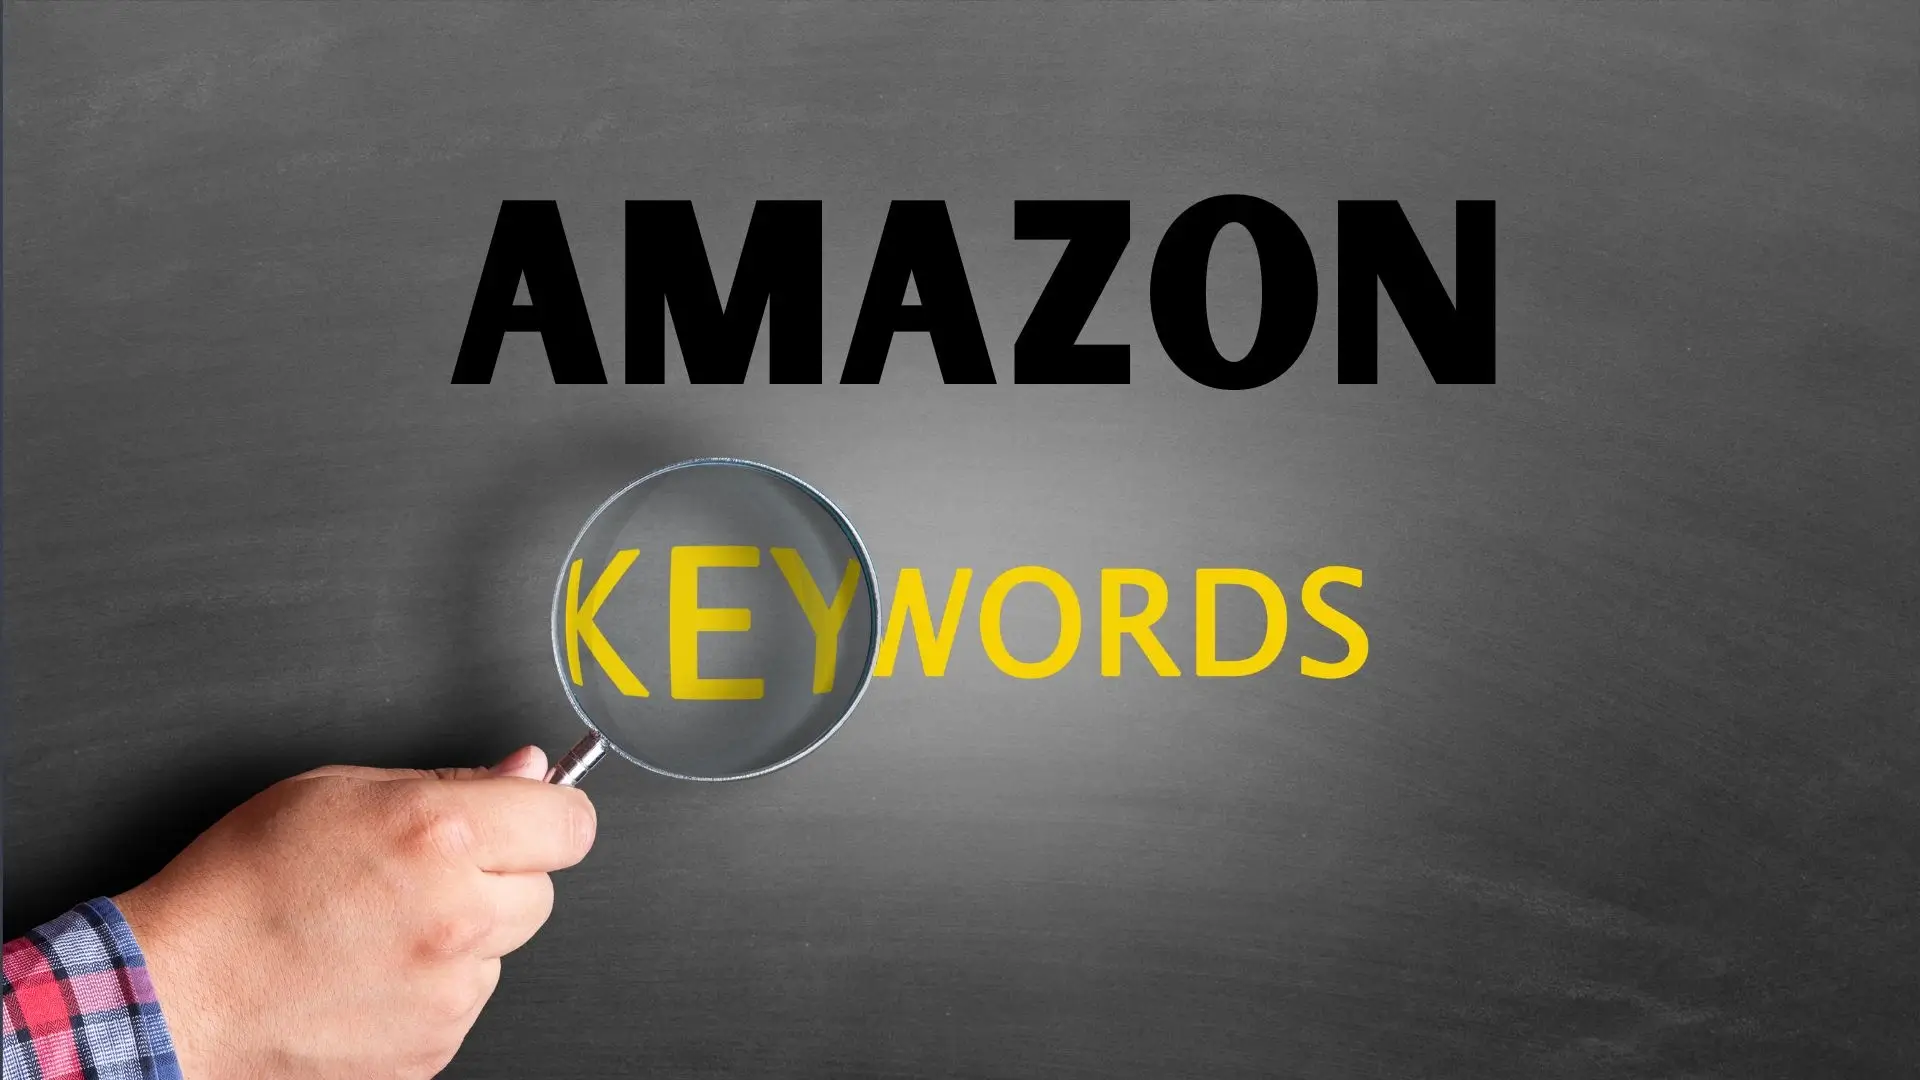 An image with the words Amazon keywords and a magnifying glass on 'key' in keywords.